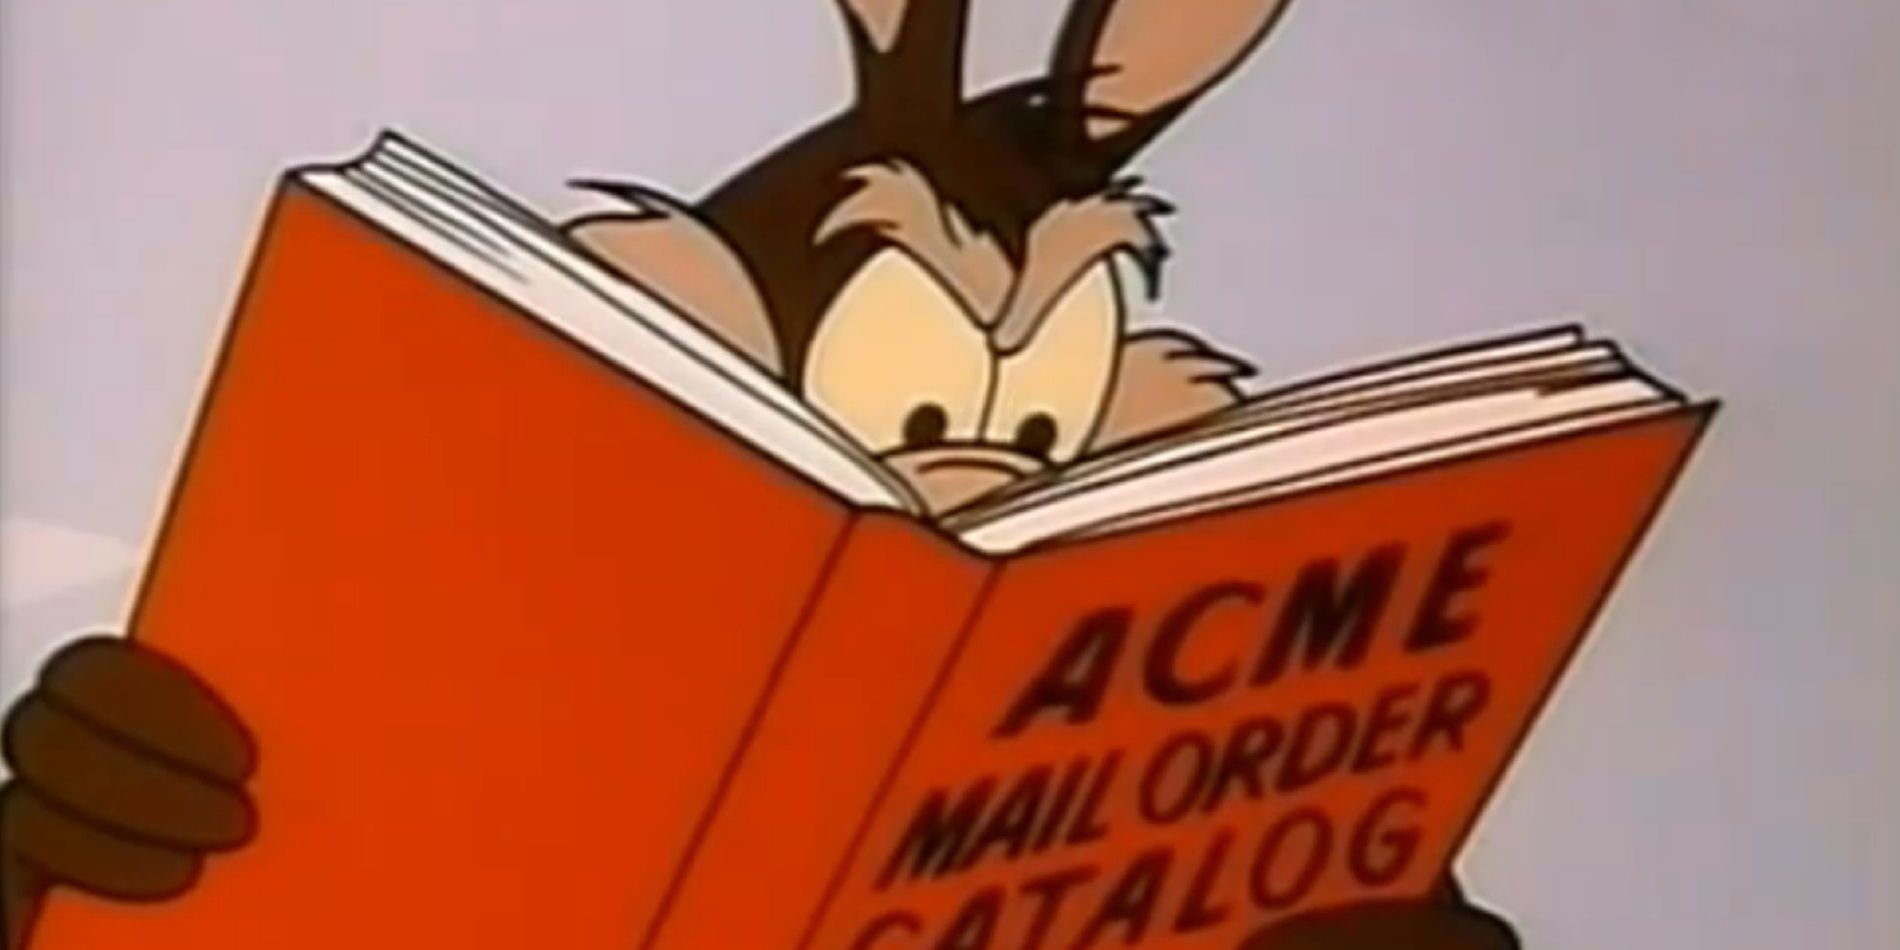 Wile E Coyote reads an Acme catalog in Looney Tunes